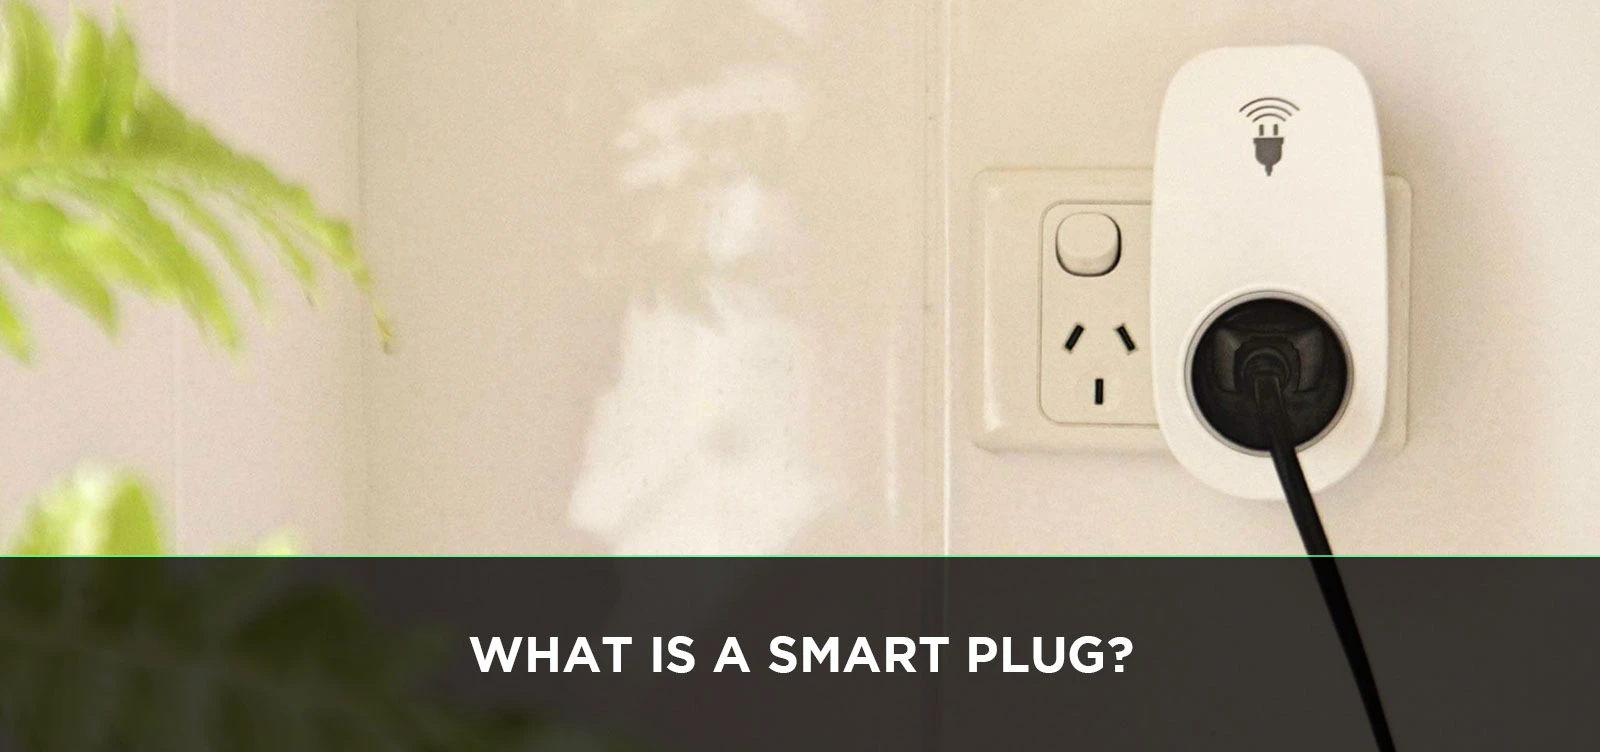 What Is a Smart Plug